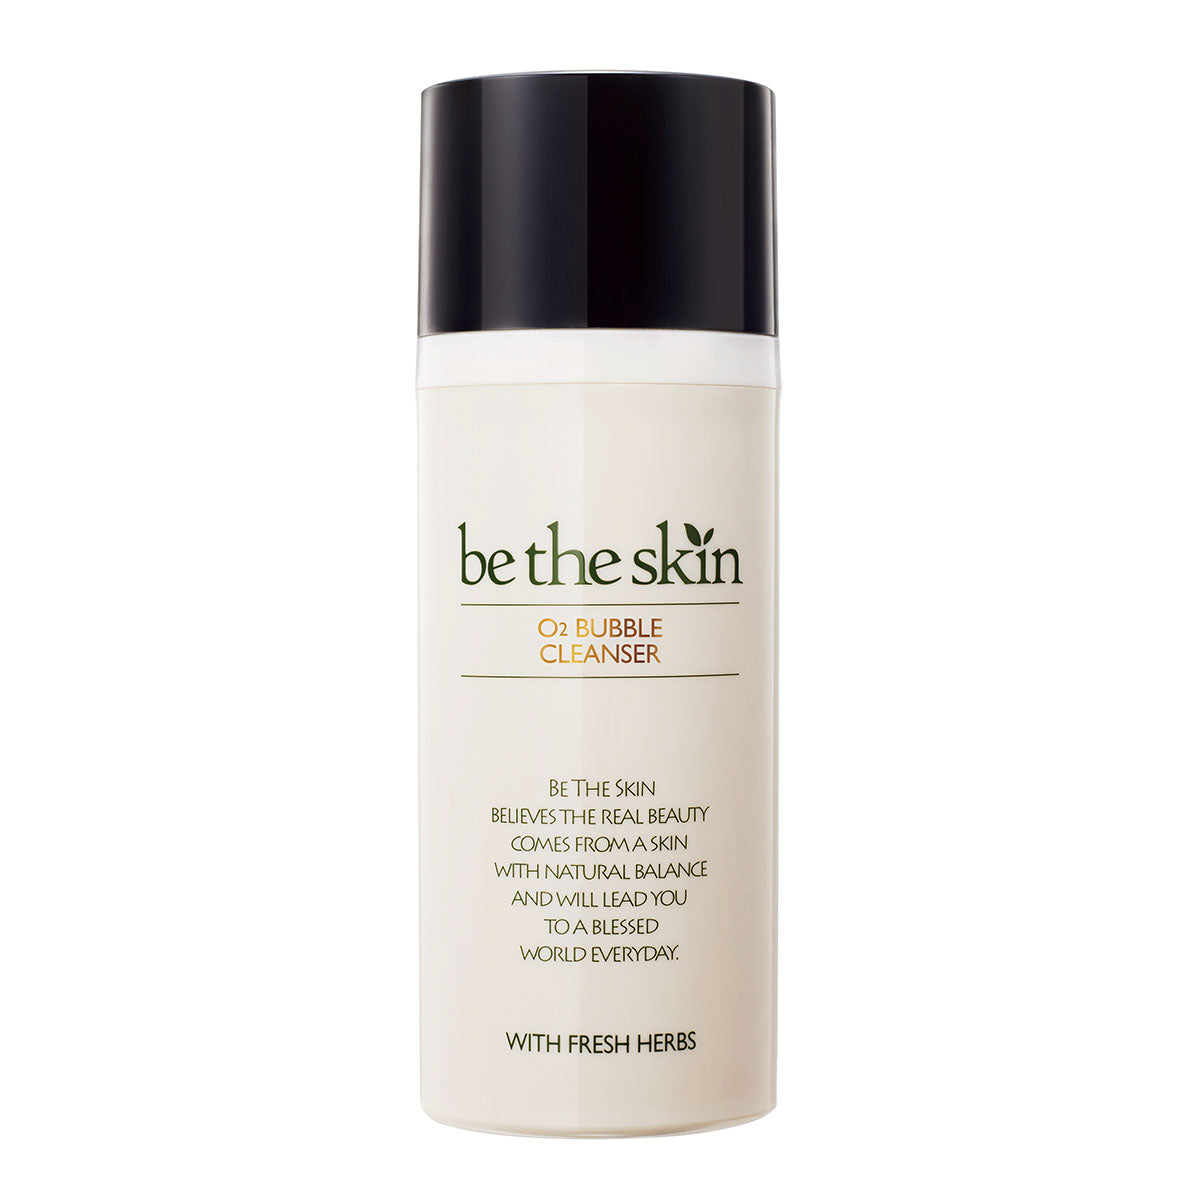 Be The Skin O2 Bubble Cleanser 3.3oz / 100ml